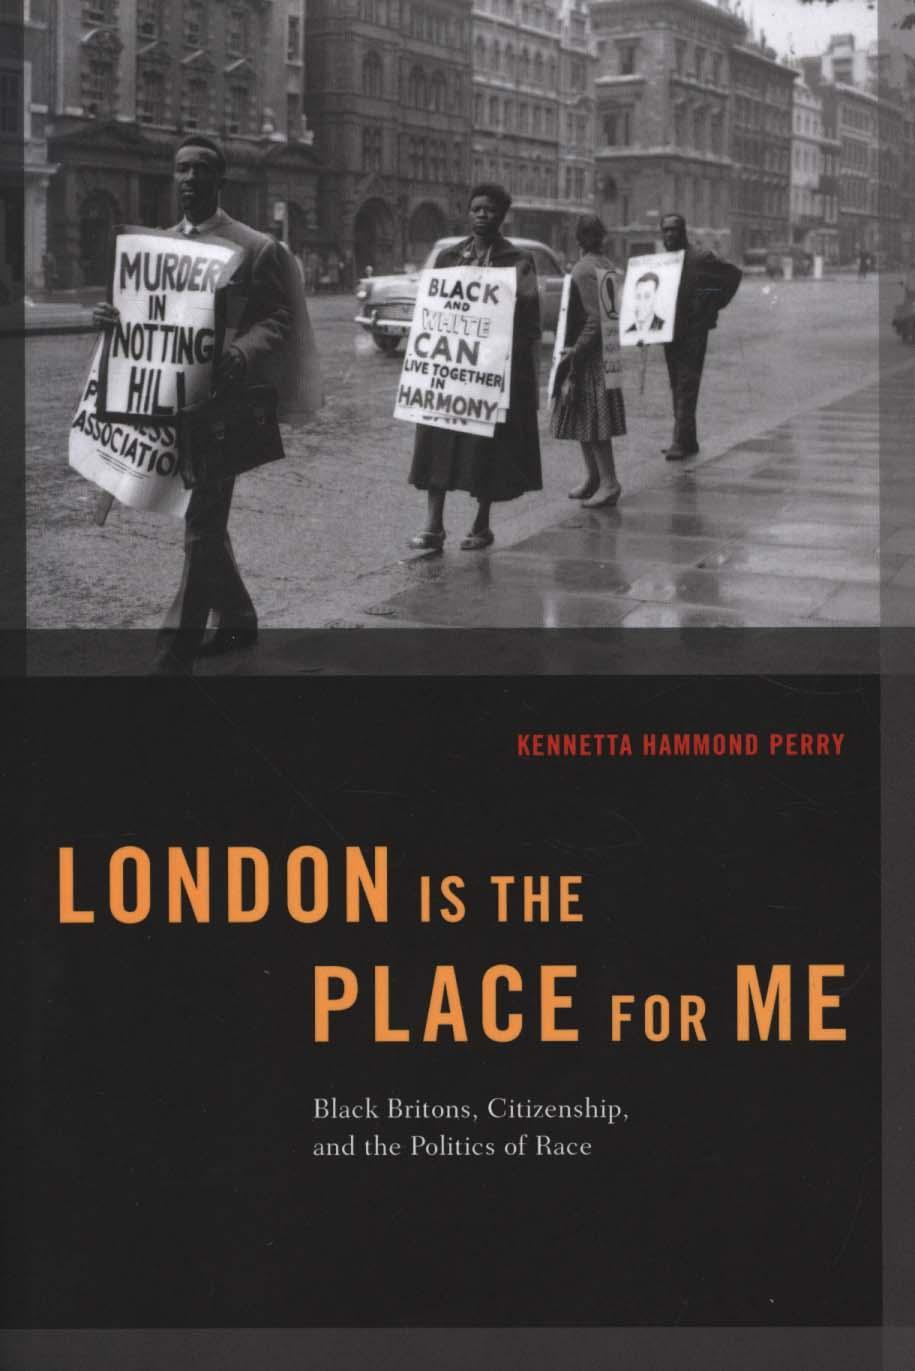 London is the Place for Me - Kennetta Hammond Perry